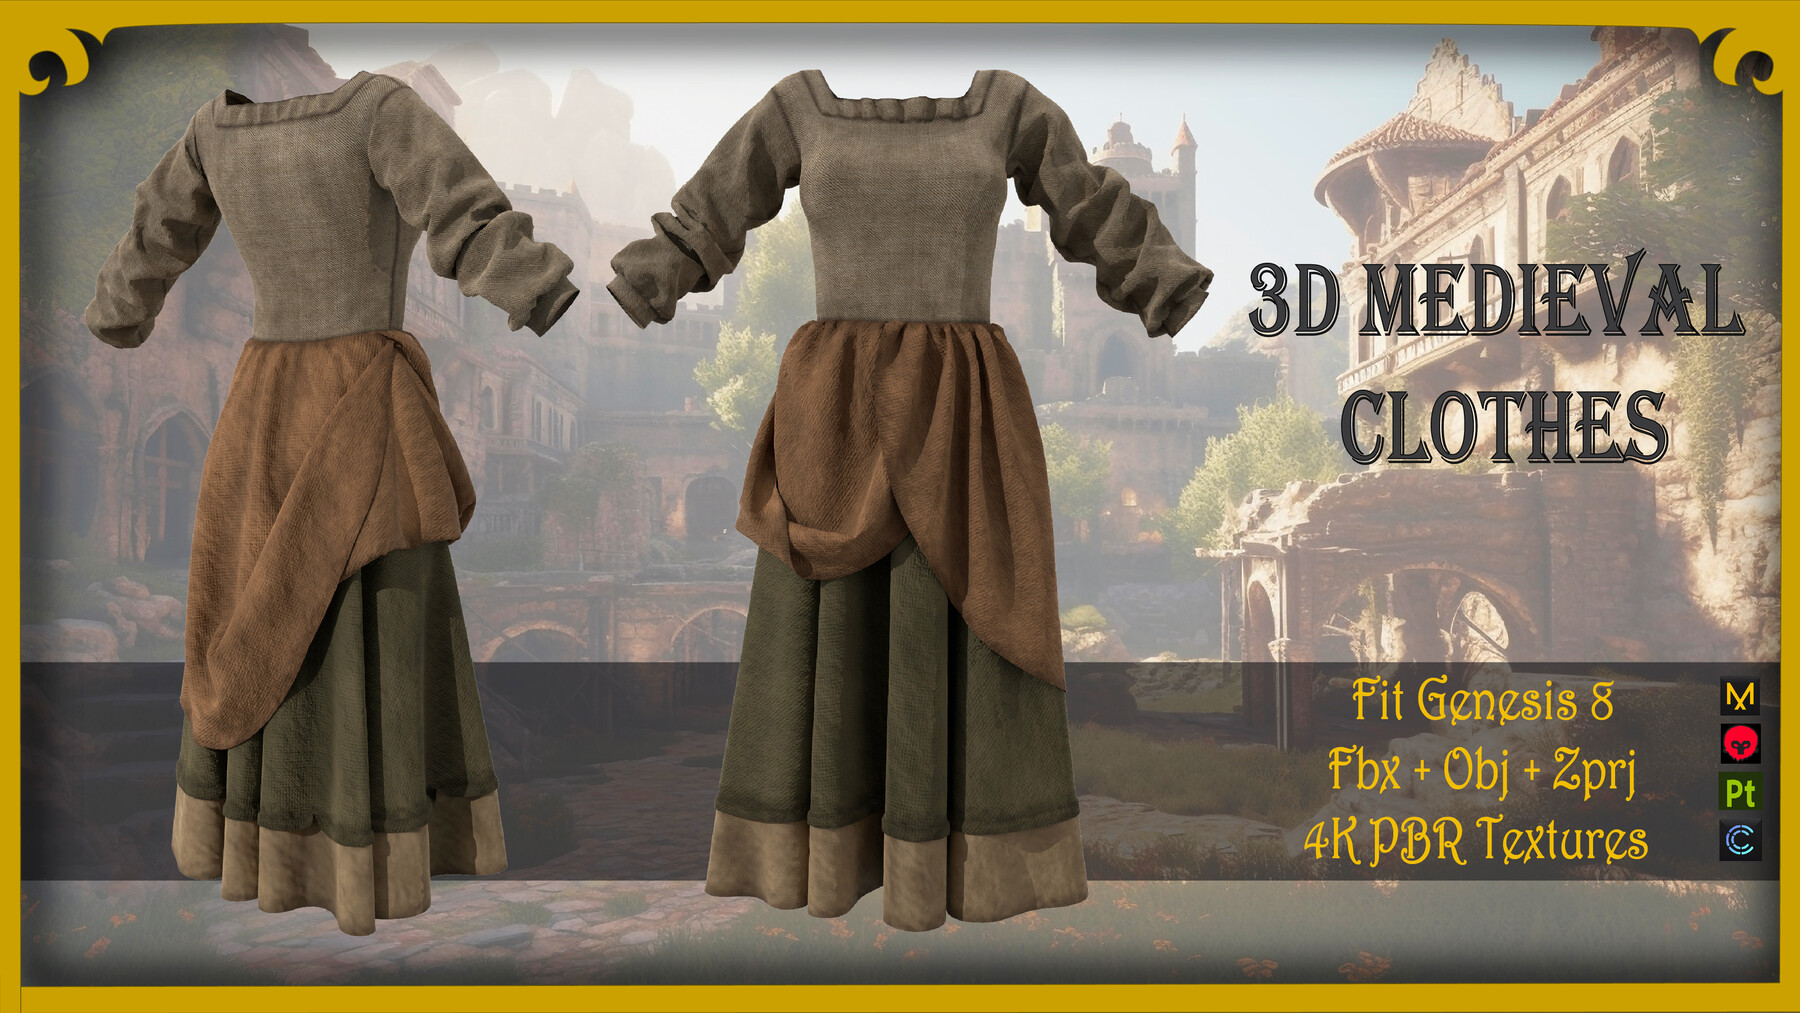 ArtStation - Peasant farmer dress Medieval charcater clothes | Resources